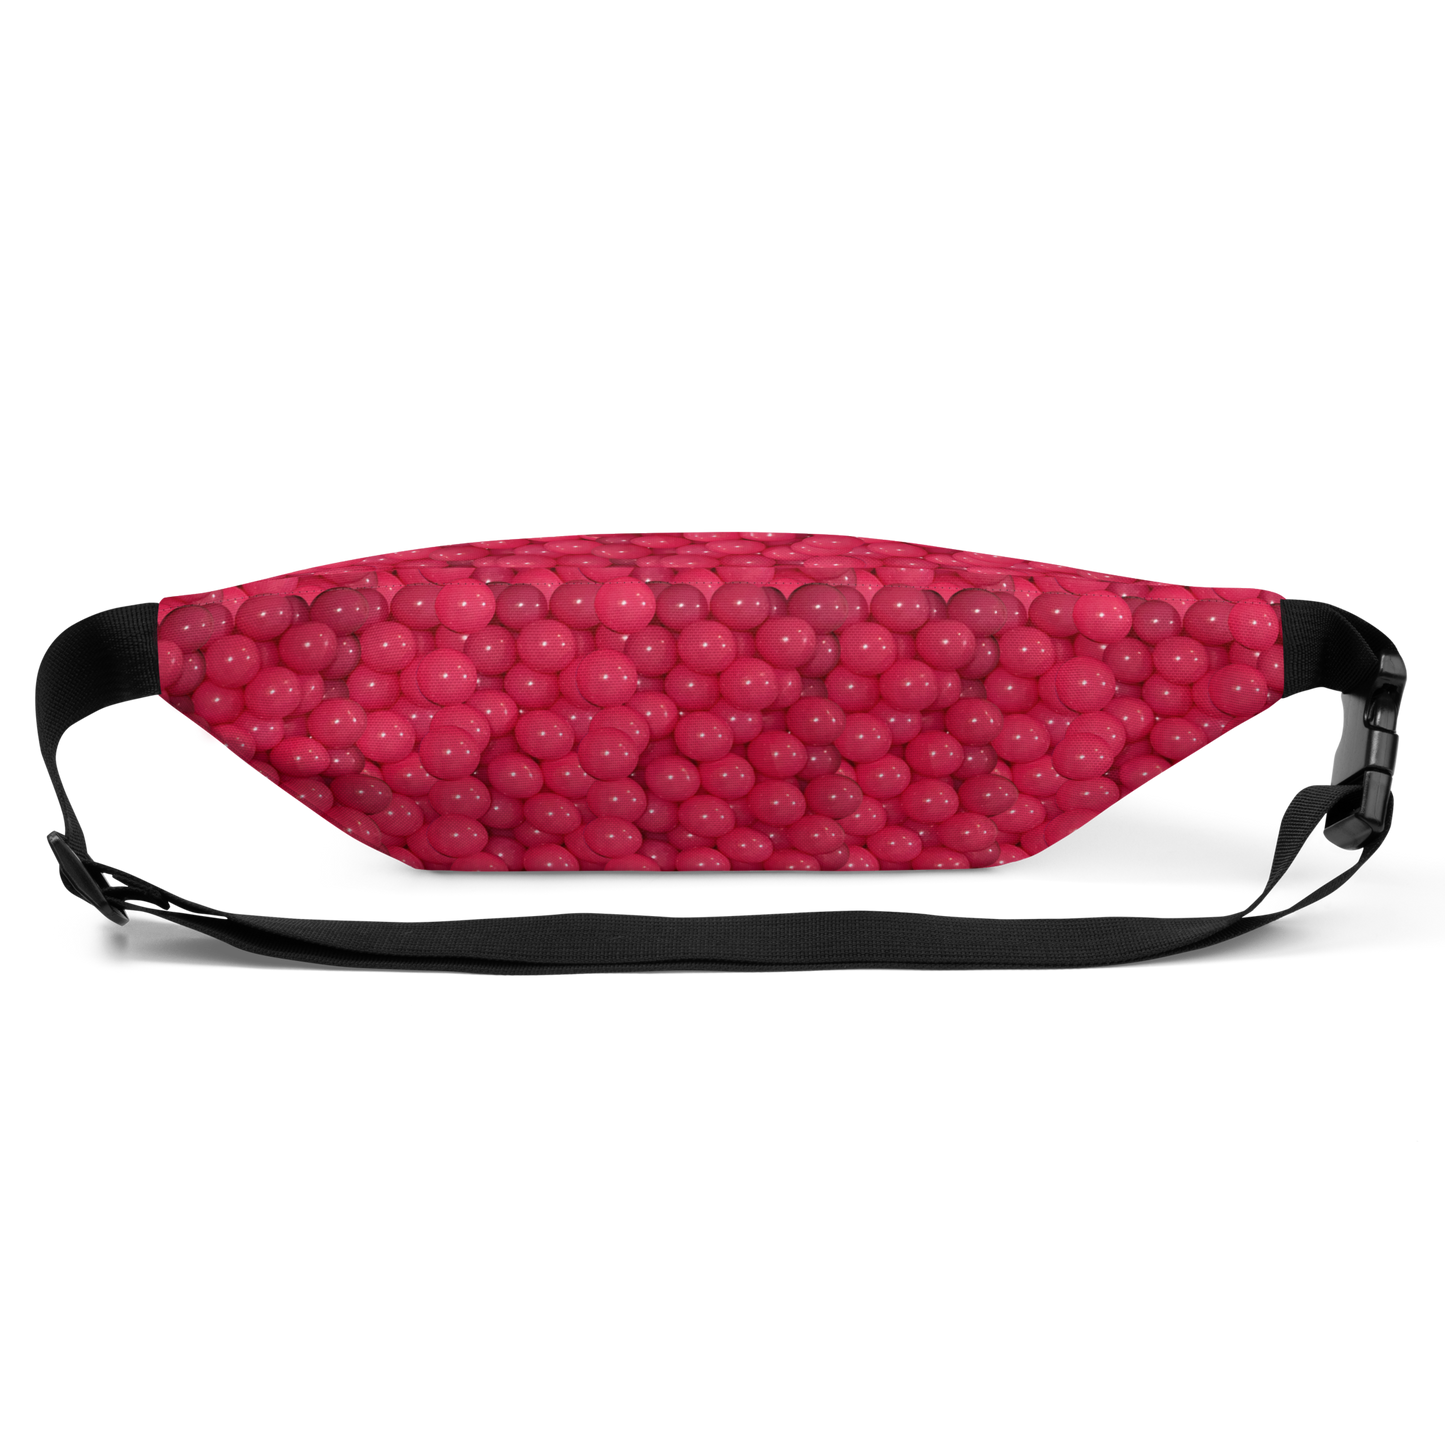 Ball Pit in Pink Fanny Pack